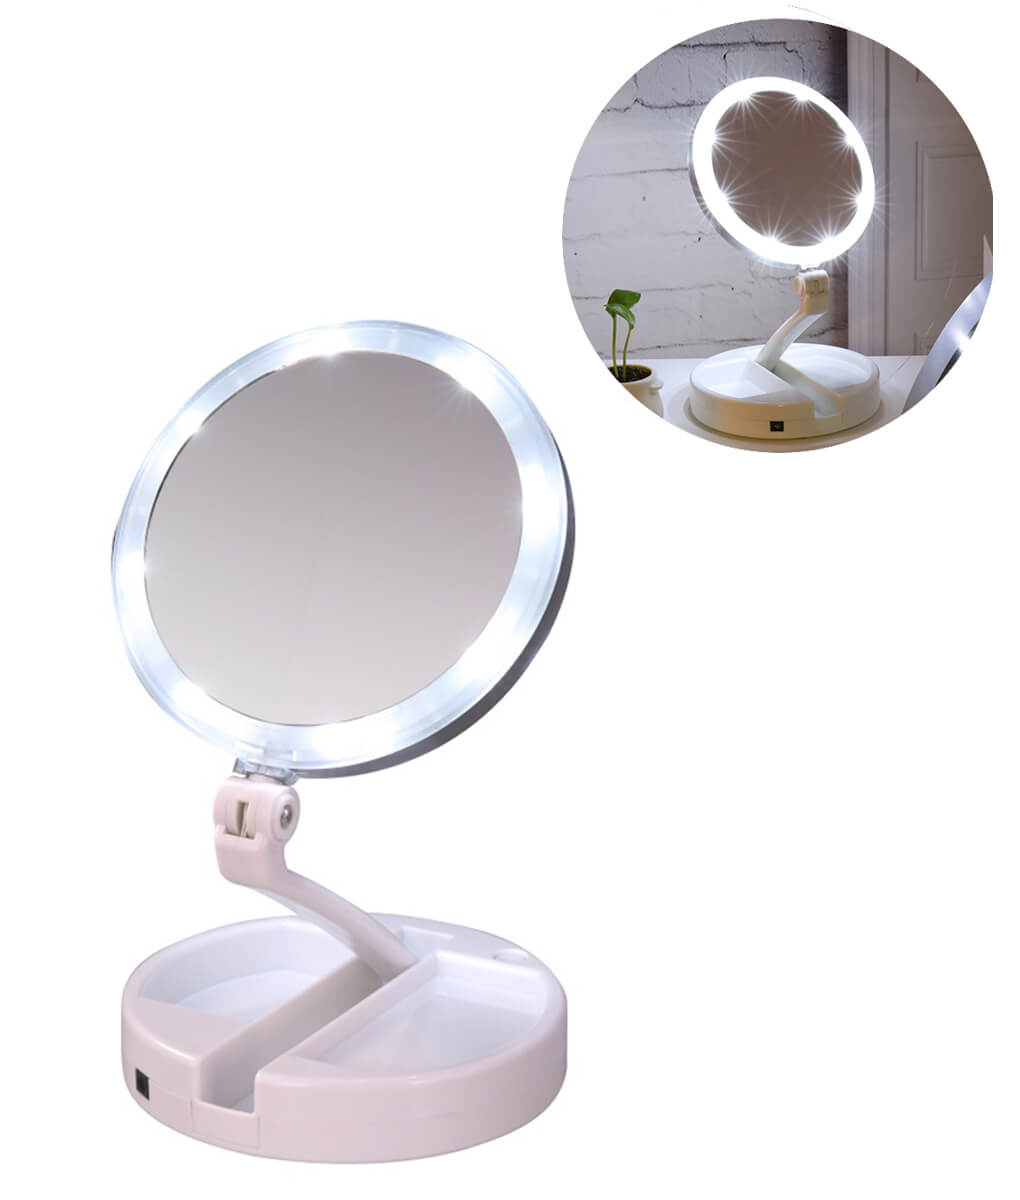 2 Sided Mirror 12x LED Lighted Folding Travel Mirror 